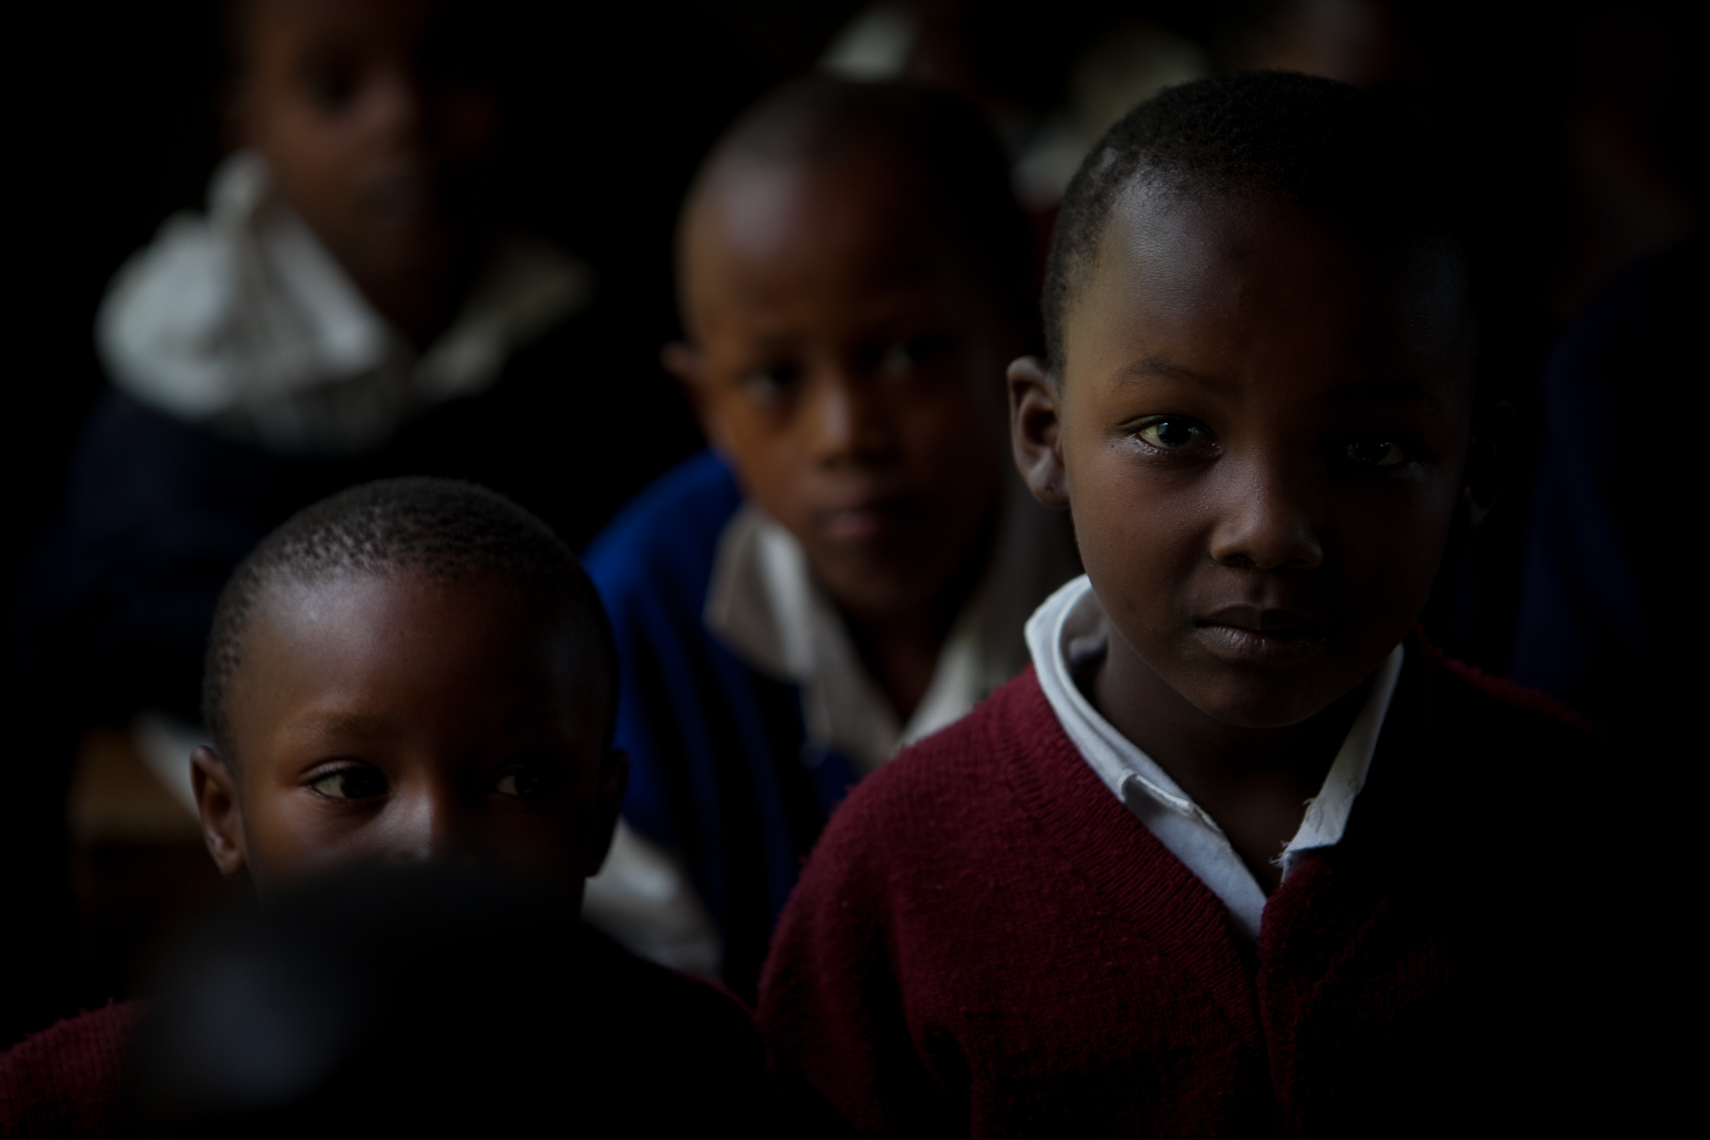 Faces_of_East_Africa_for_Rustic_Pathways_20110714_photo_by_Justin_Kase_Conder_0040